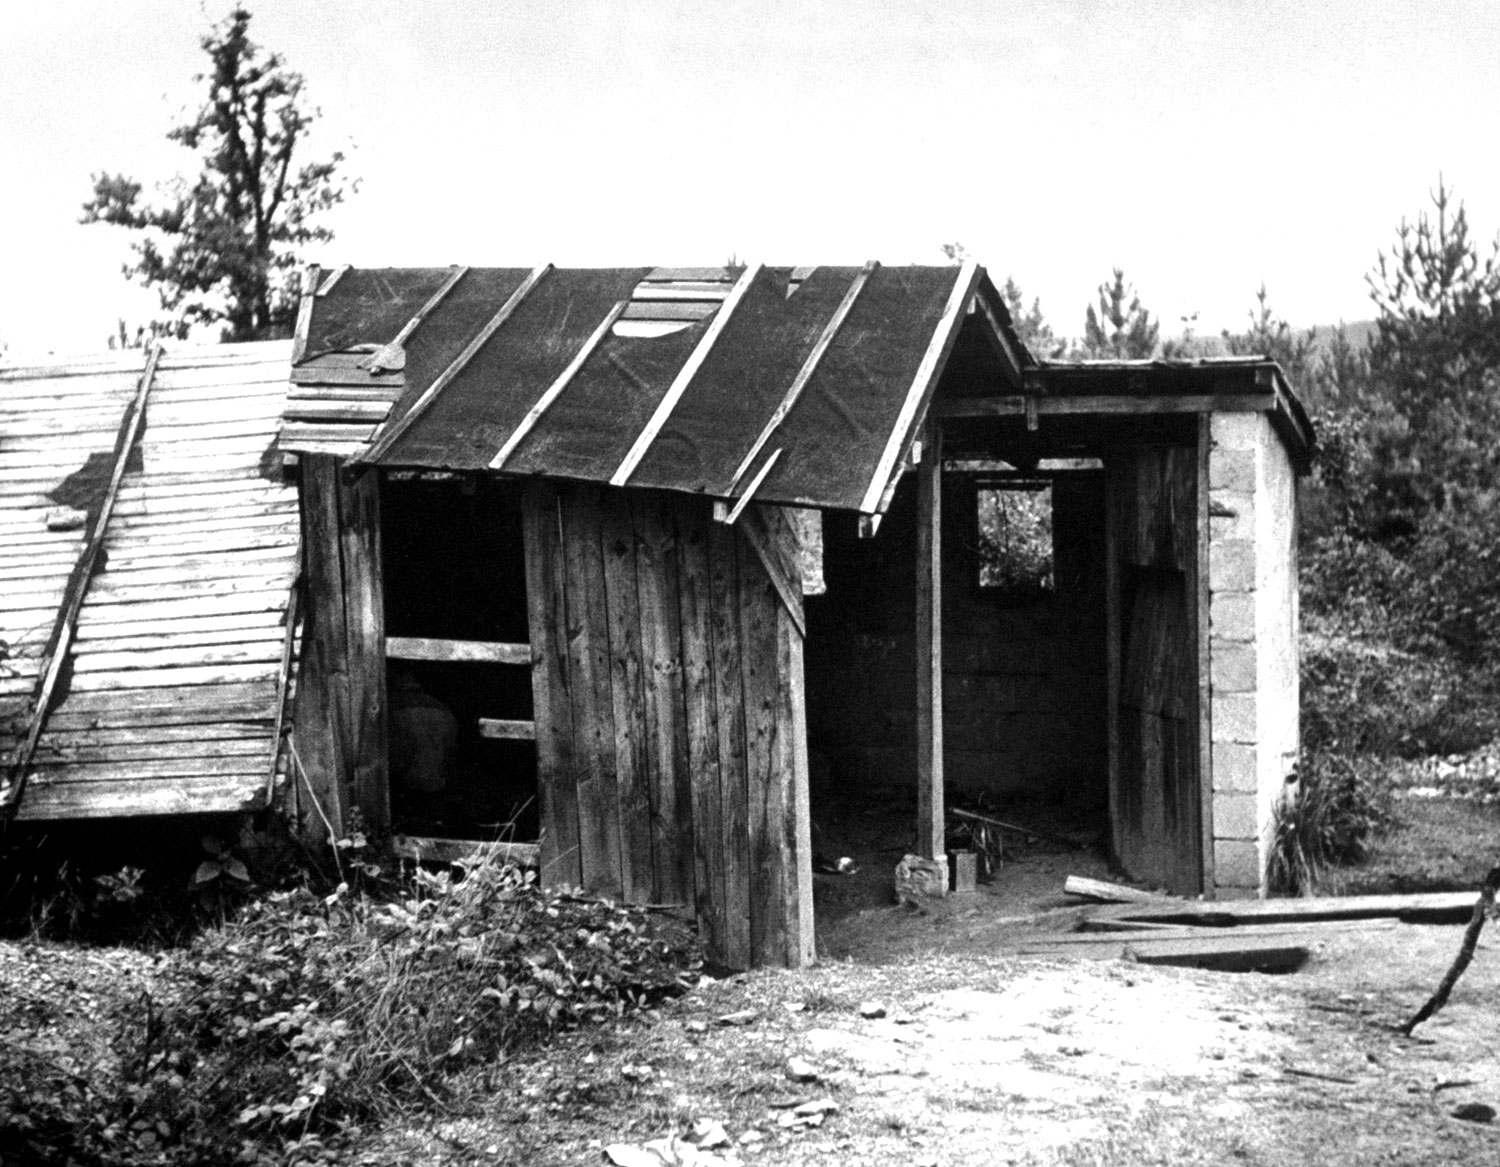 The ramshackle shed that covered the entrance to the Lascaux caves in 1947 attests to the site's remoteness; the lack of general interest the cave might have incited during the chaotic and uncertain war years; and the rough, dirty job Morse and his crew faced even before they started shooting underground.